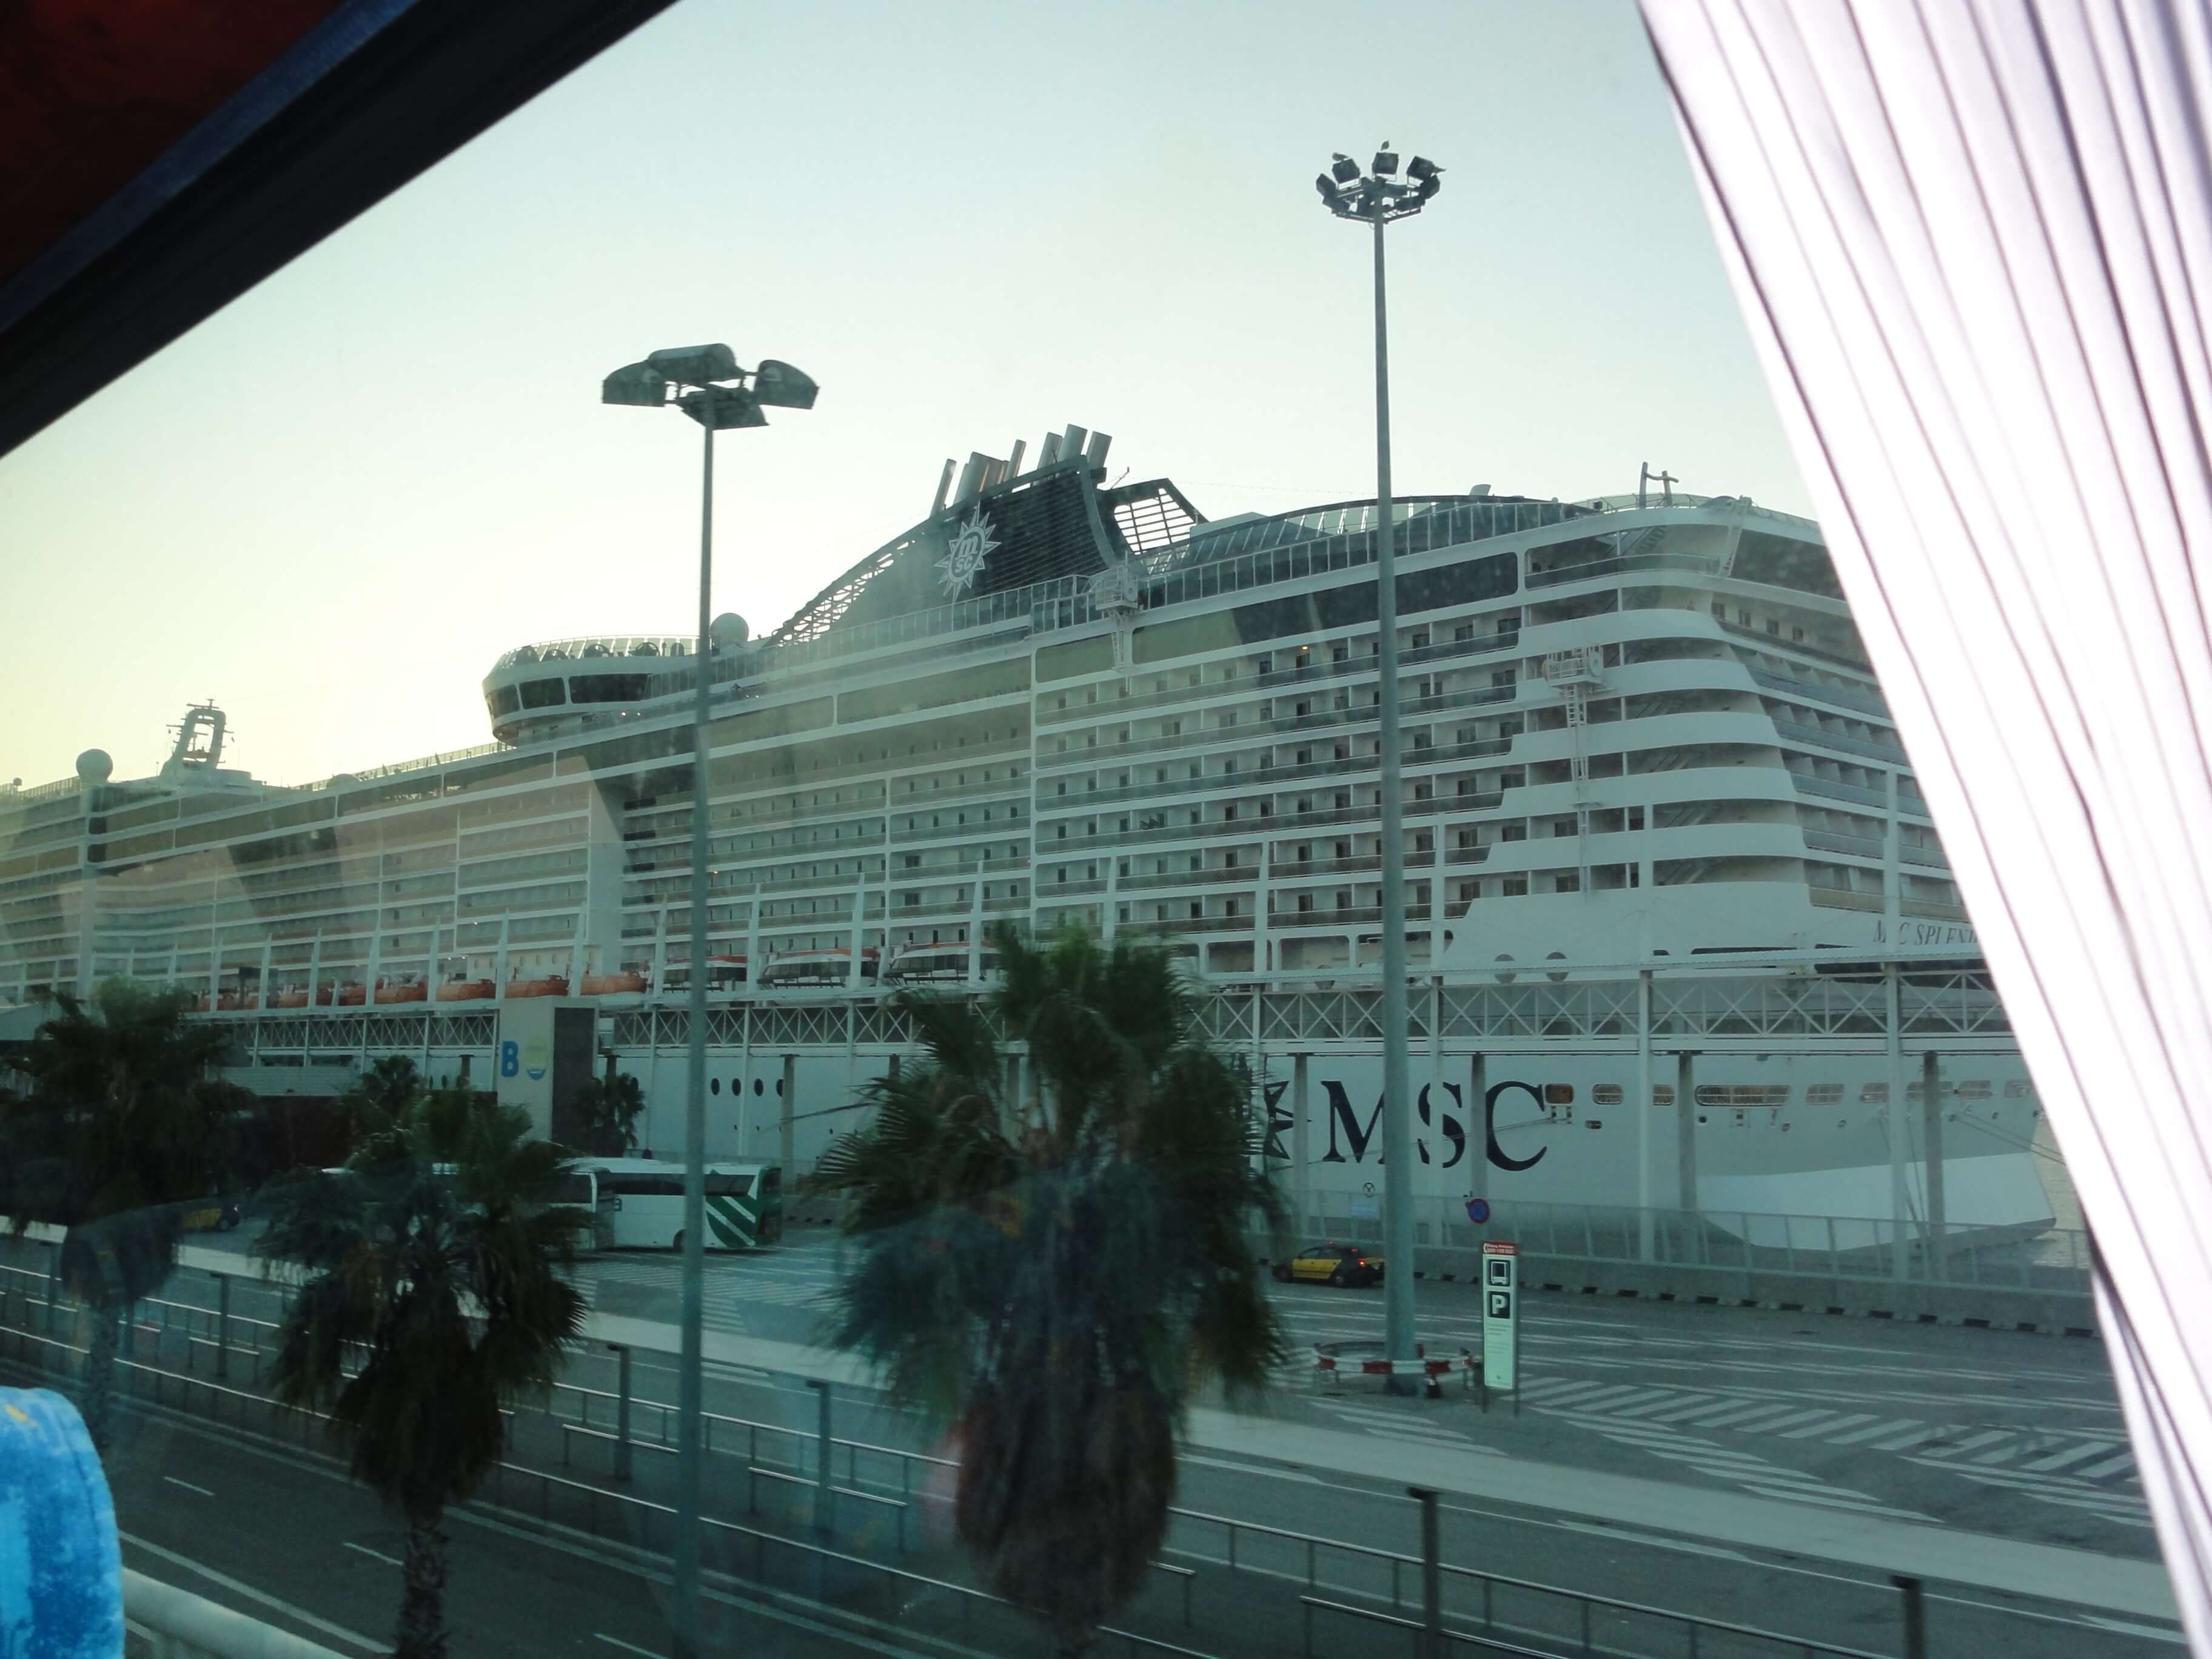 Cruise liner view